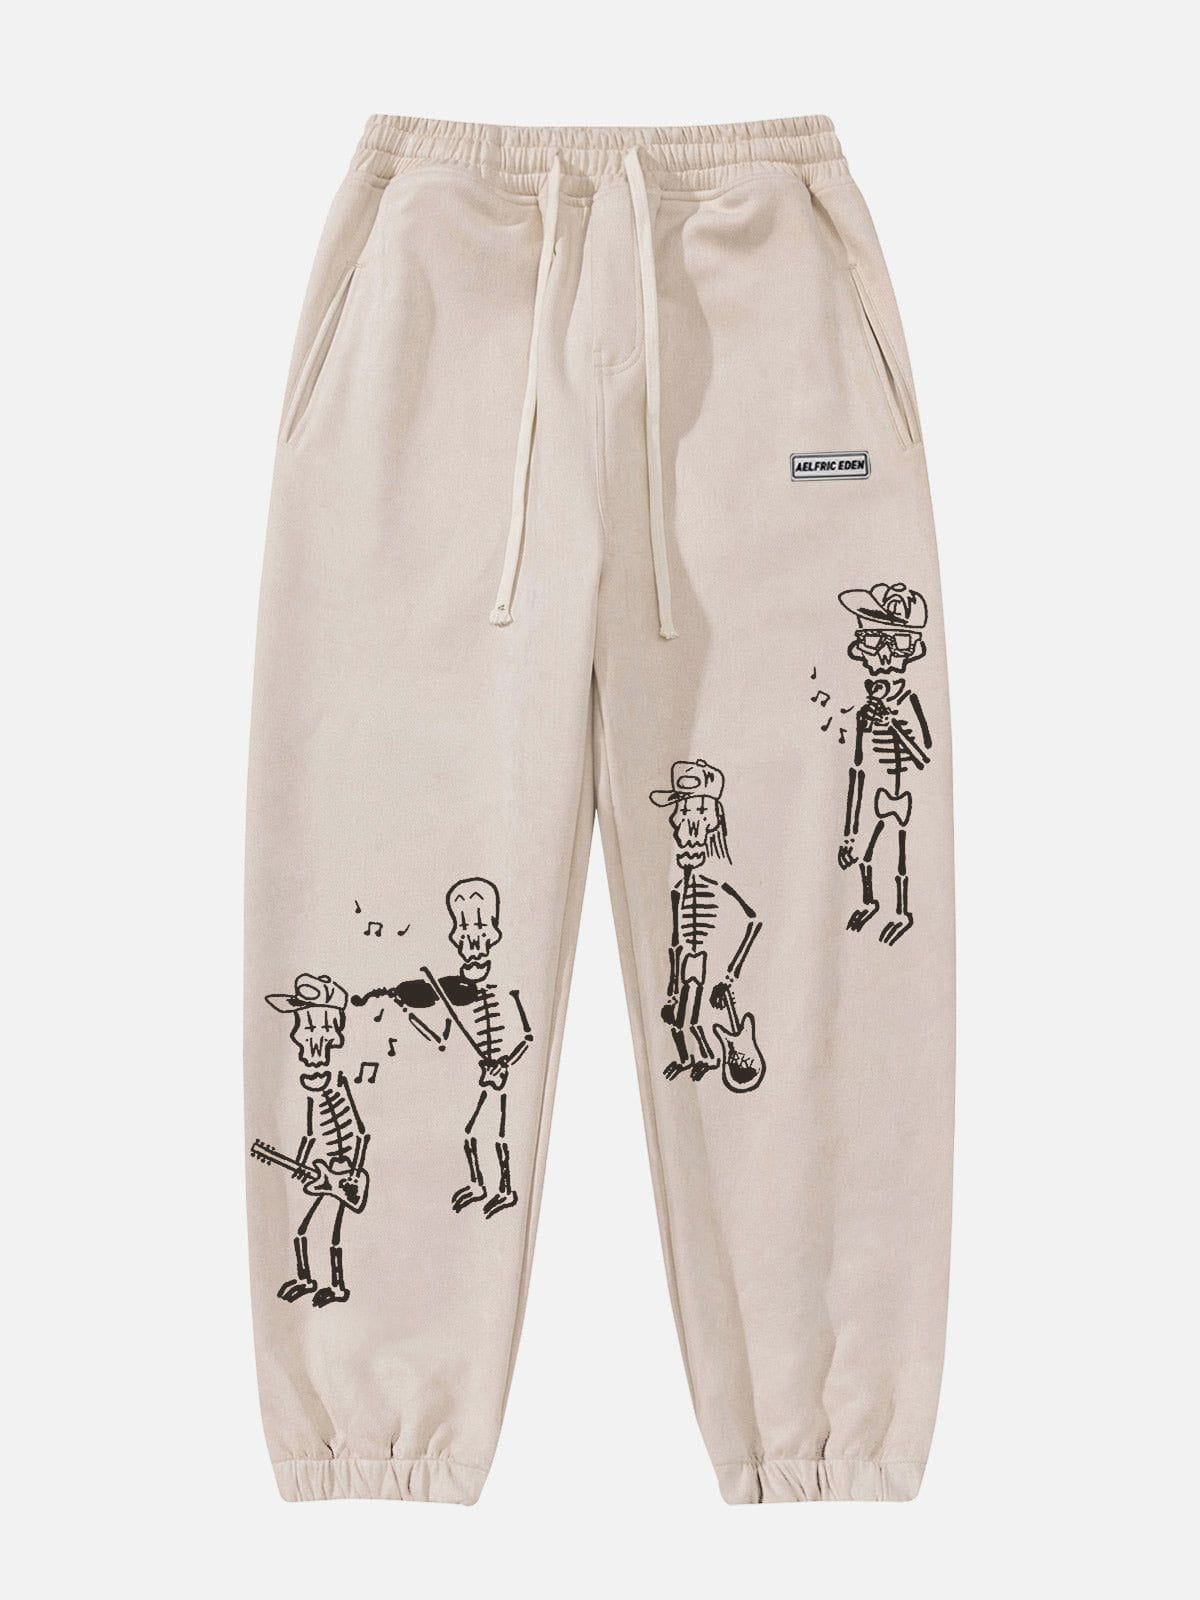 Aelfric Eden Funny Little People Print Sweatpants [Recommended by @iammanu.seven7]